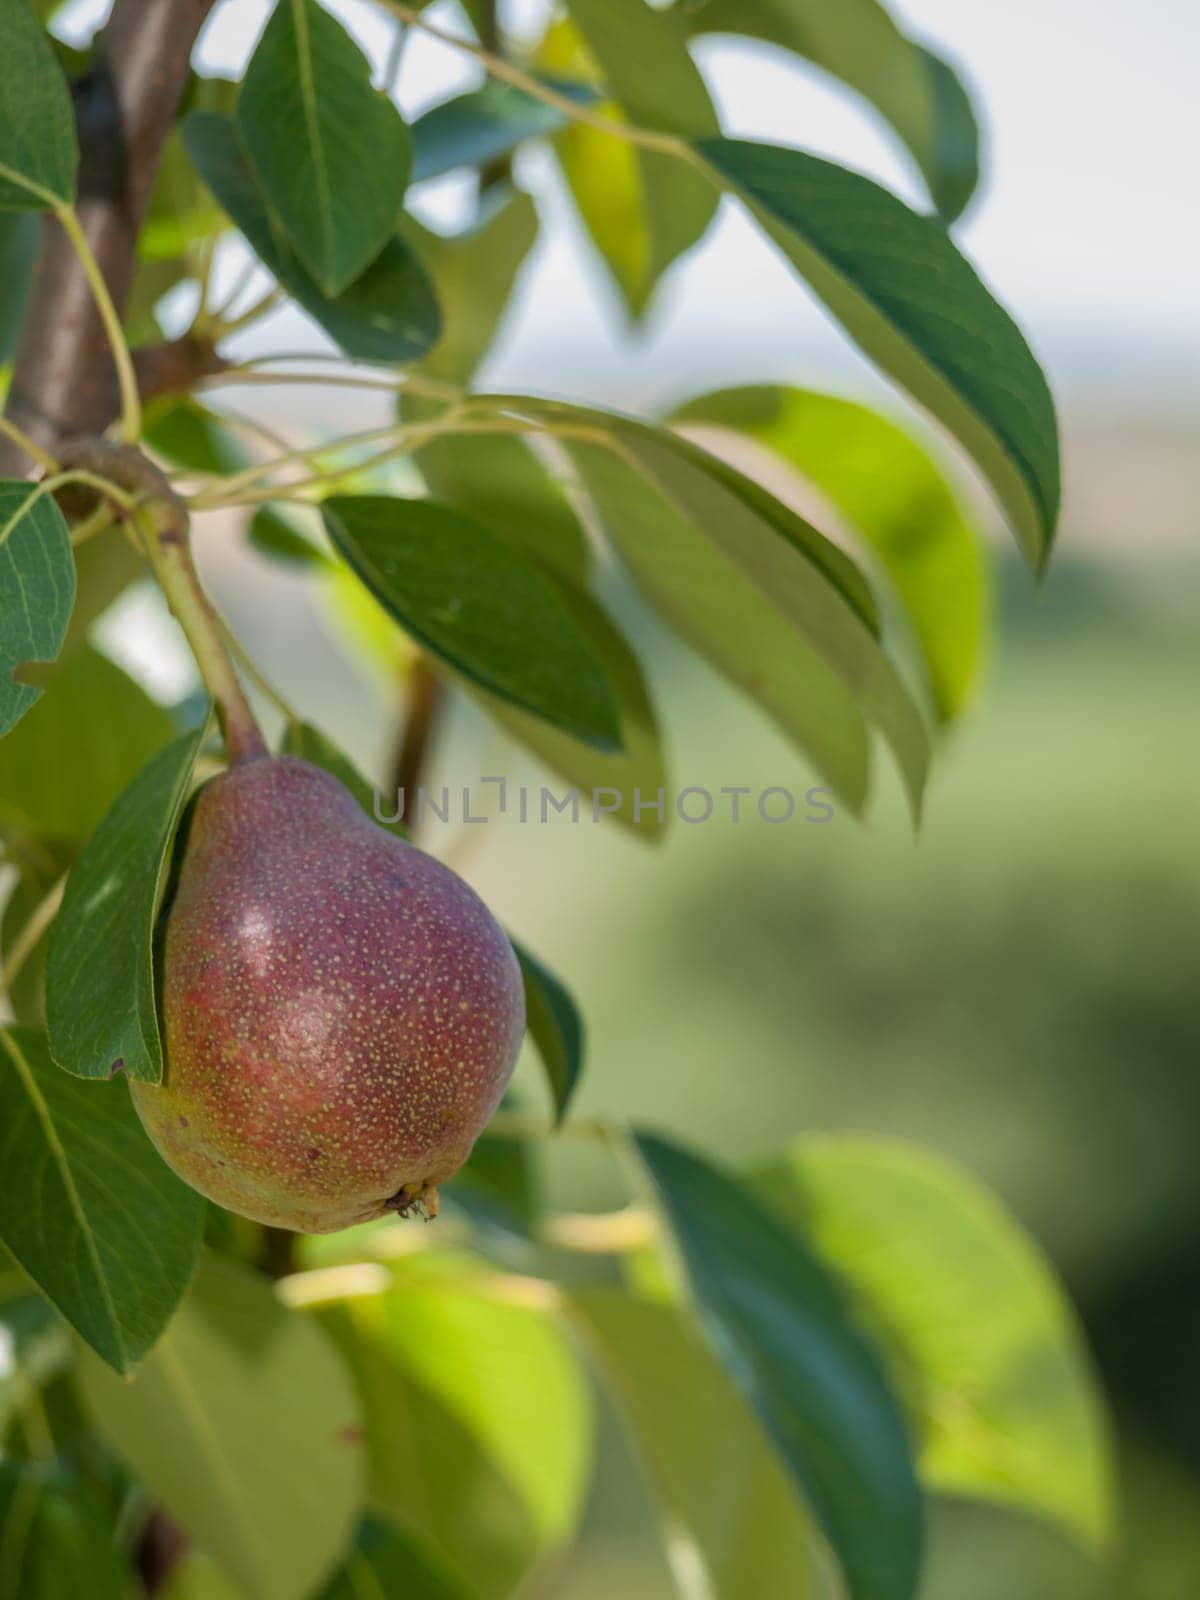 Close-up view of pear on the tree in summer day with blurred background. Shallow depth of field.